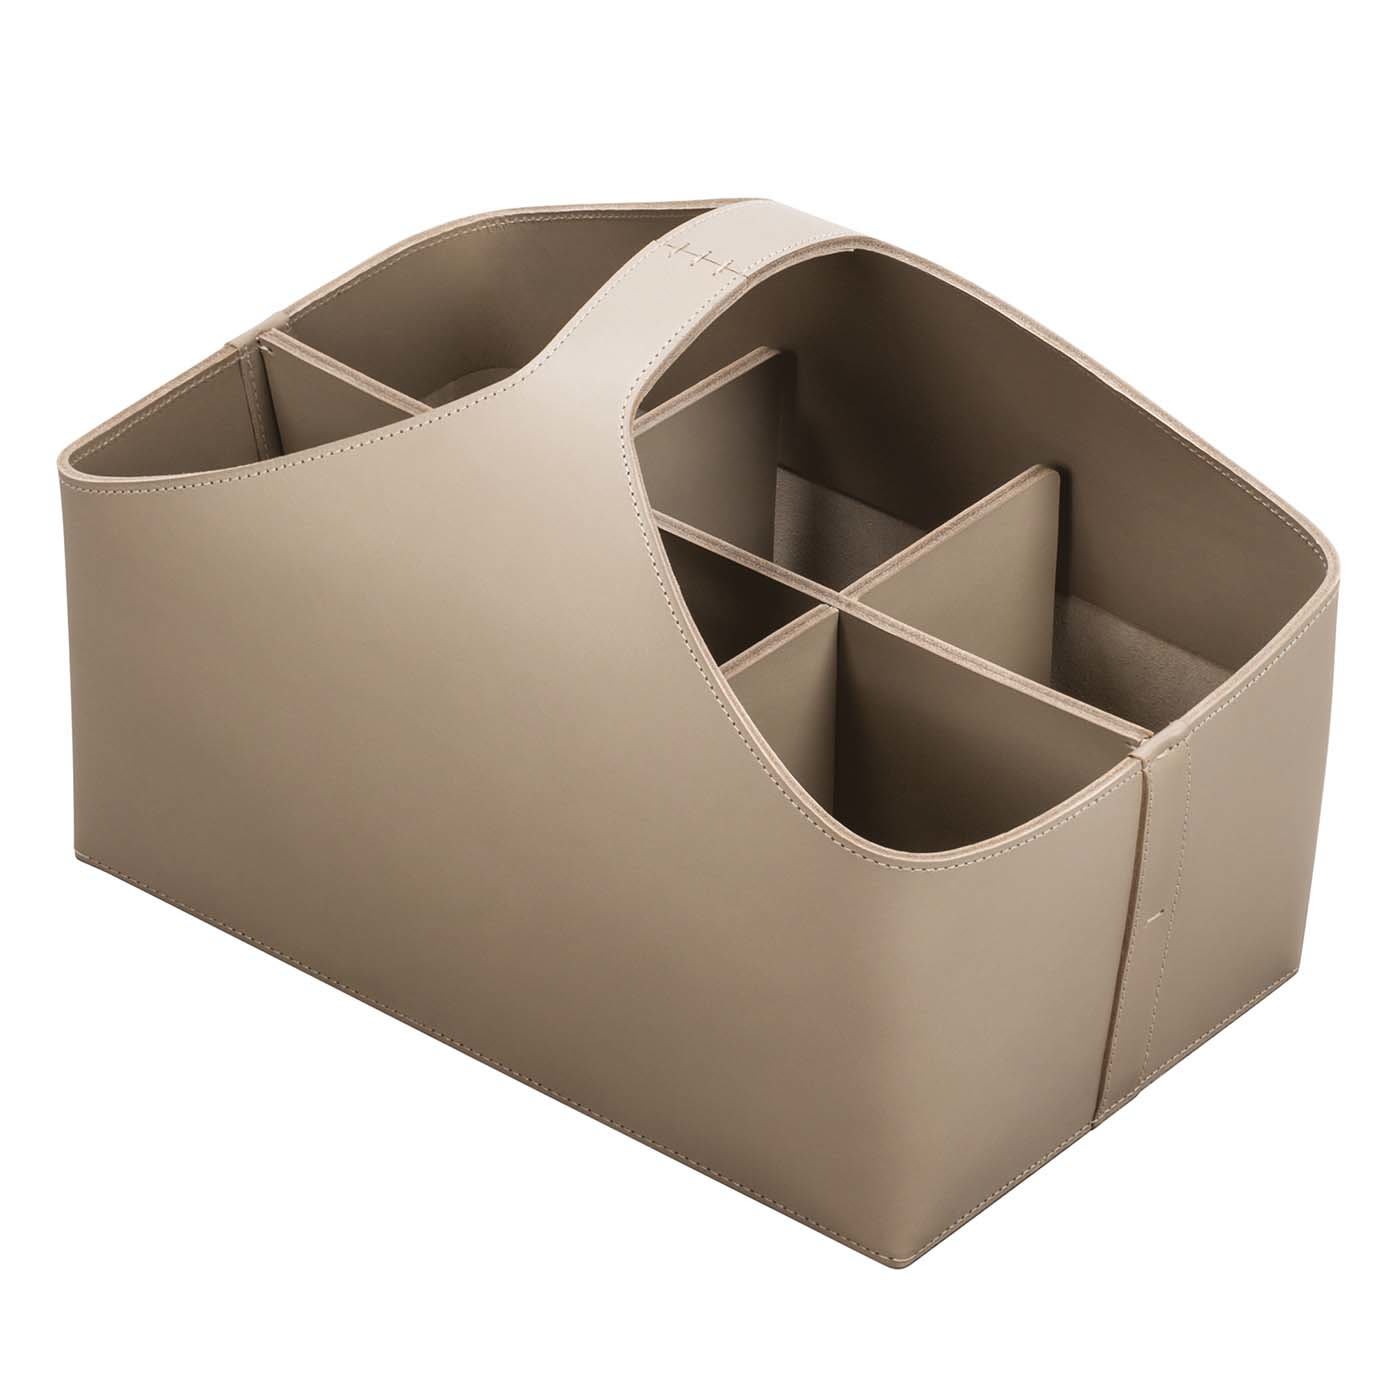 Arco Medium Caddy Basket with 6 Dividers in Sand Leather - Rabitti 1969